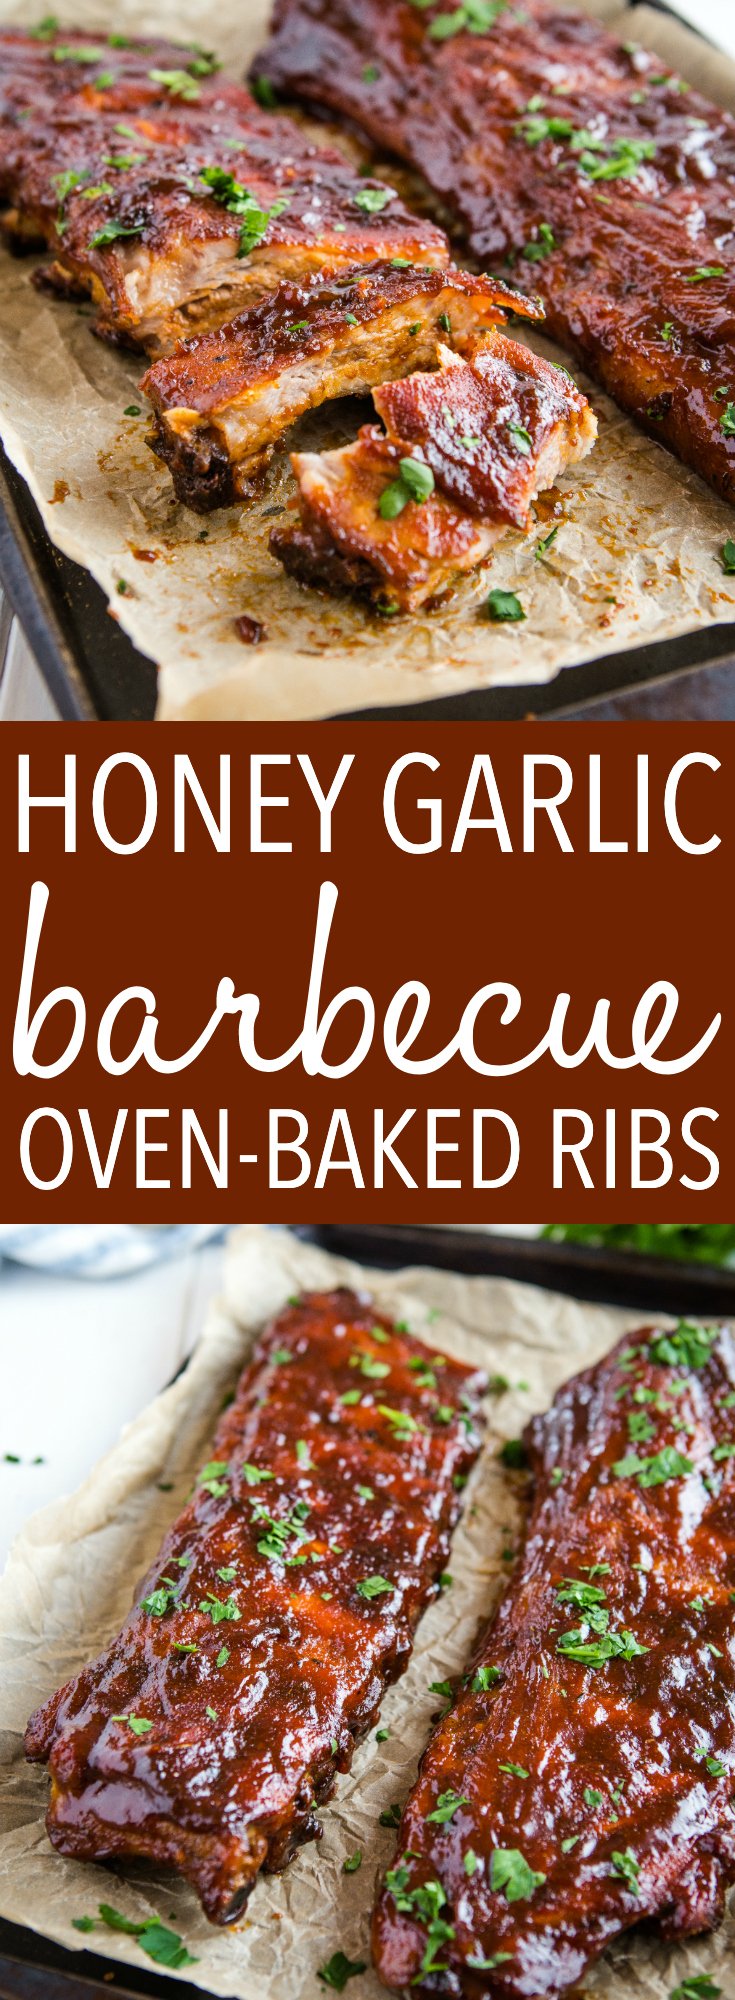 These Honey Garlic Oven-Baked Barbecue Ribs are the best and easiest way to make perfect, juicy, fall-off-the-bone ribs with a sweet honey garlic sauce! via @busybakerblog